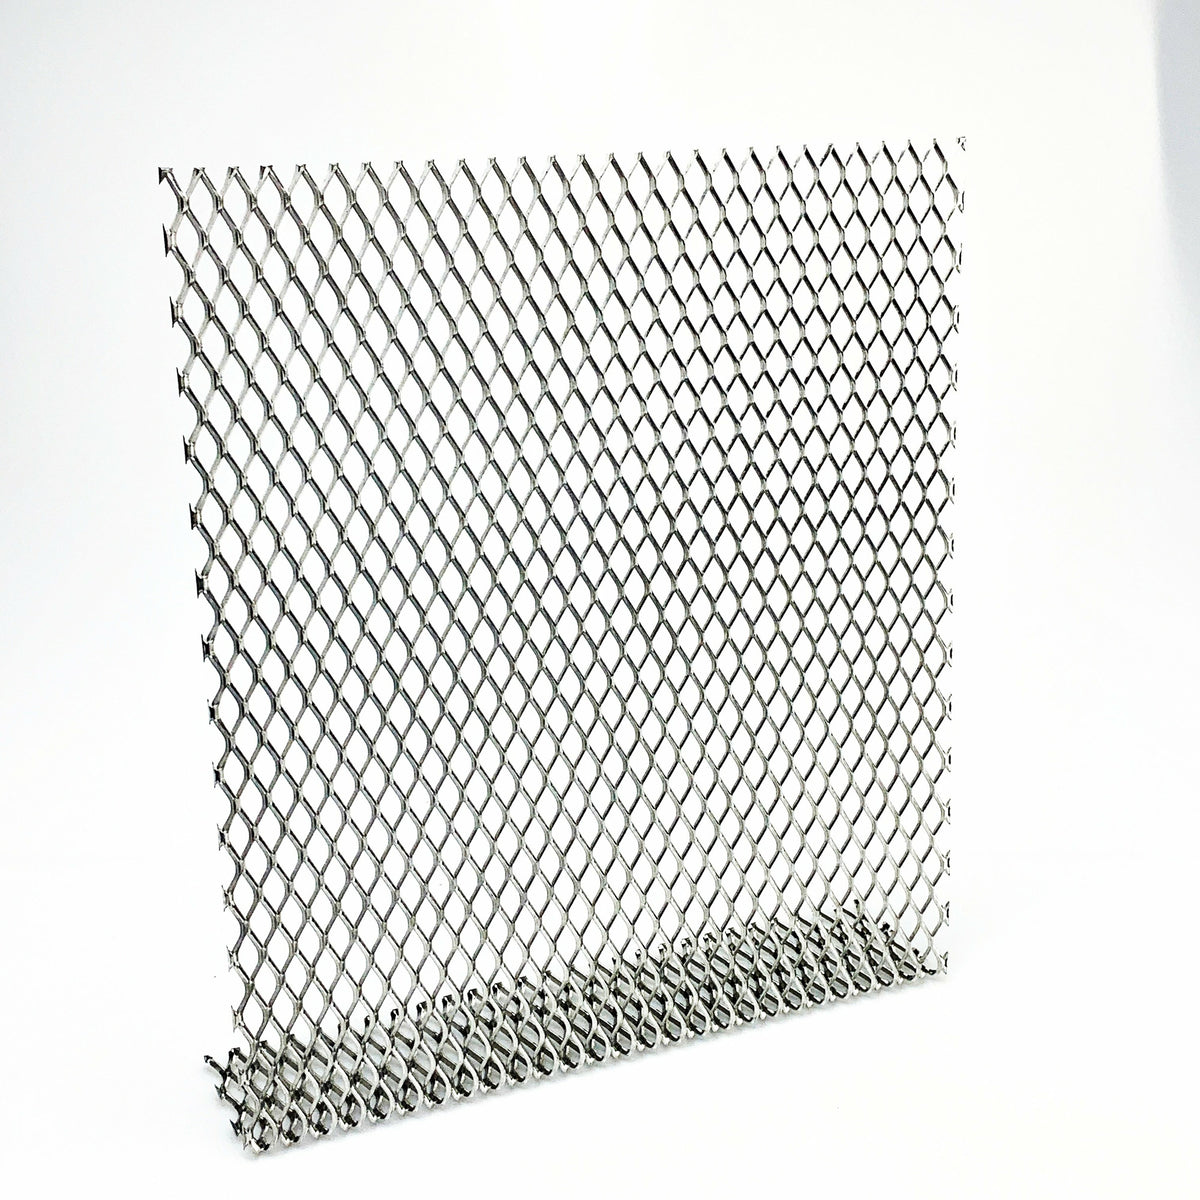 Aluminum Perforated Metal Sheets 16 Gauge 11.8 inch by 5.9 inch Expanded  Metal Mesh Aluminum Opening 1/8 0.12 inch (About 3 mm) Perforated Steel